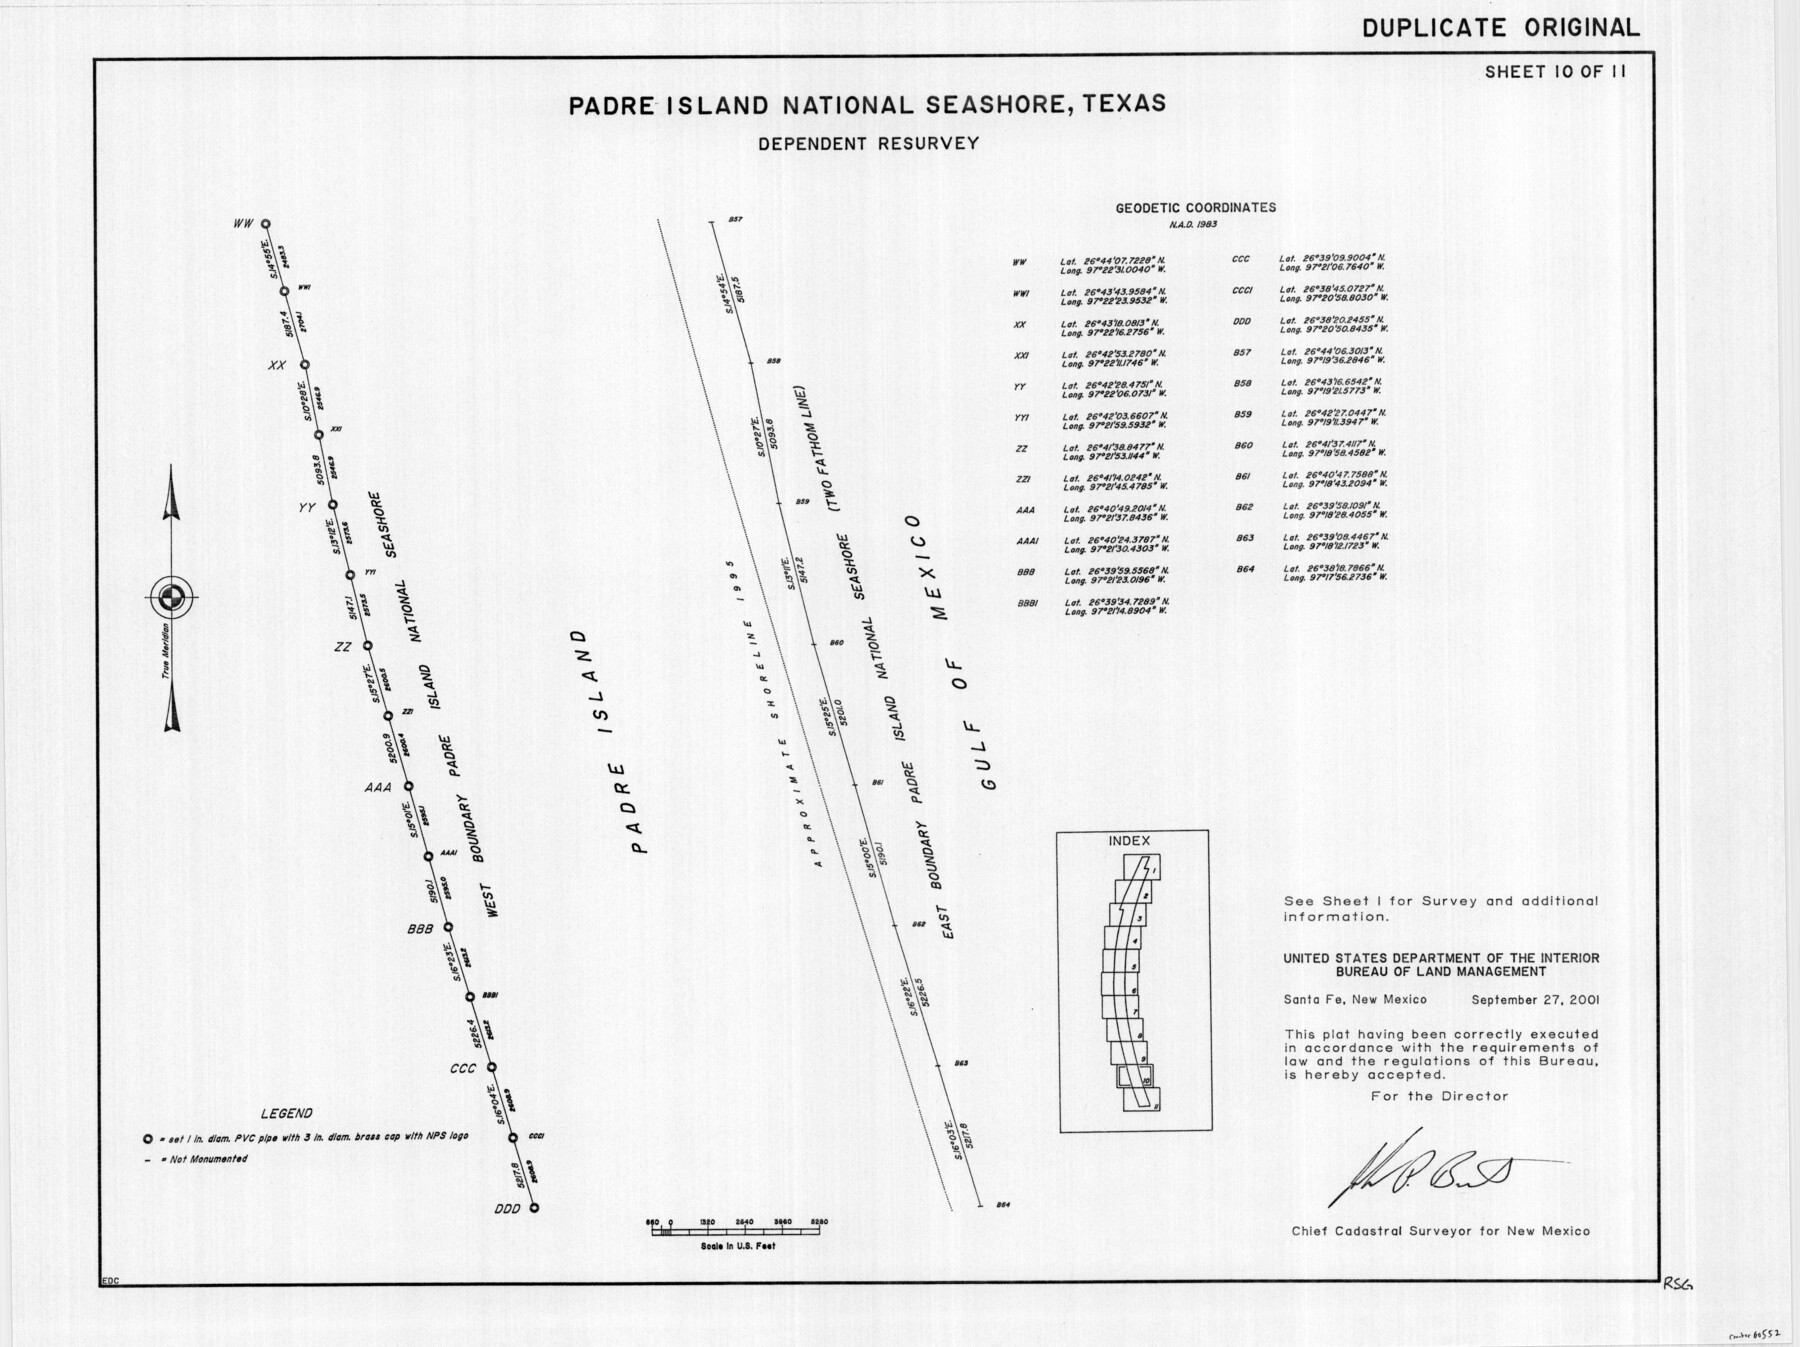 60552, Padre Island National Seashore, Texas - Dependent Resurvey, General Map Collection